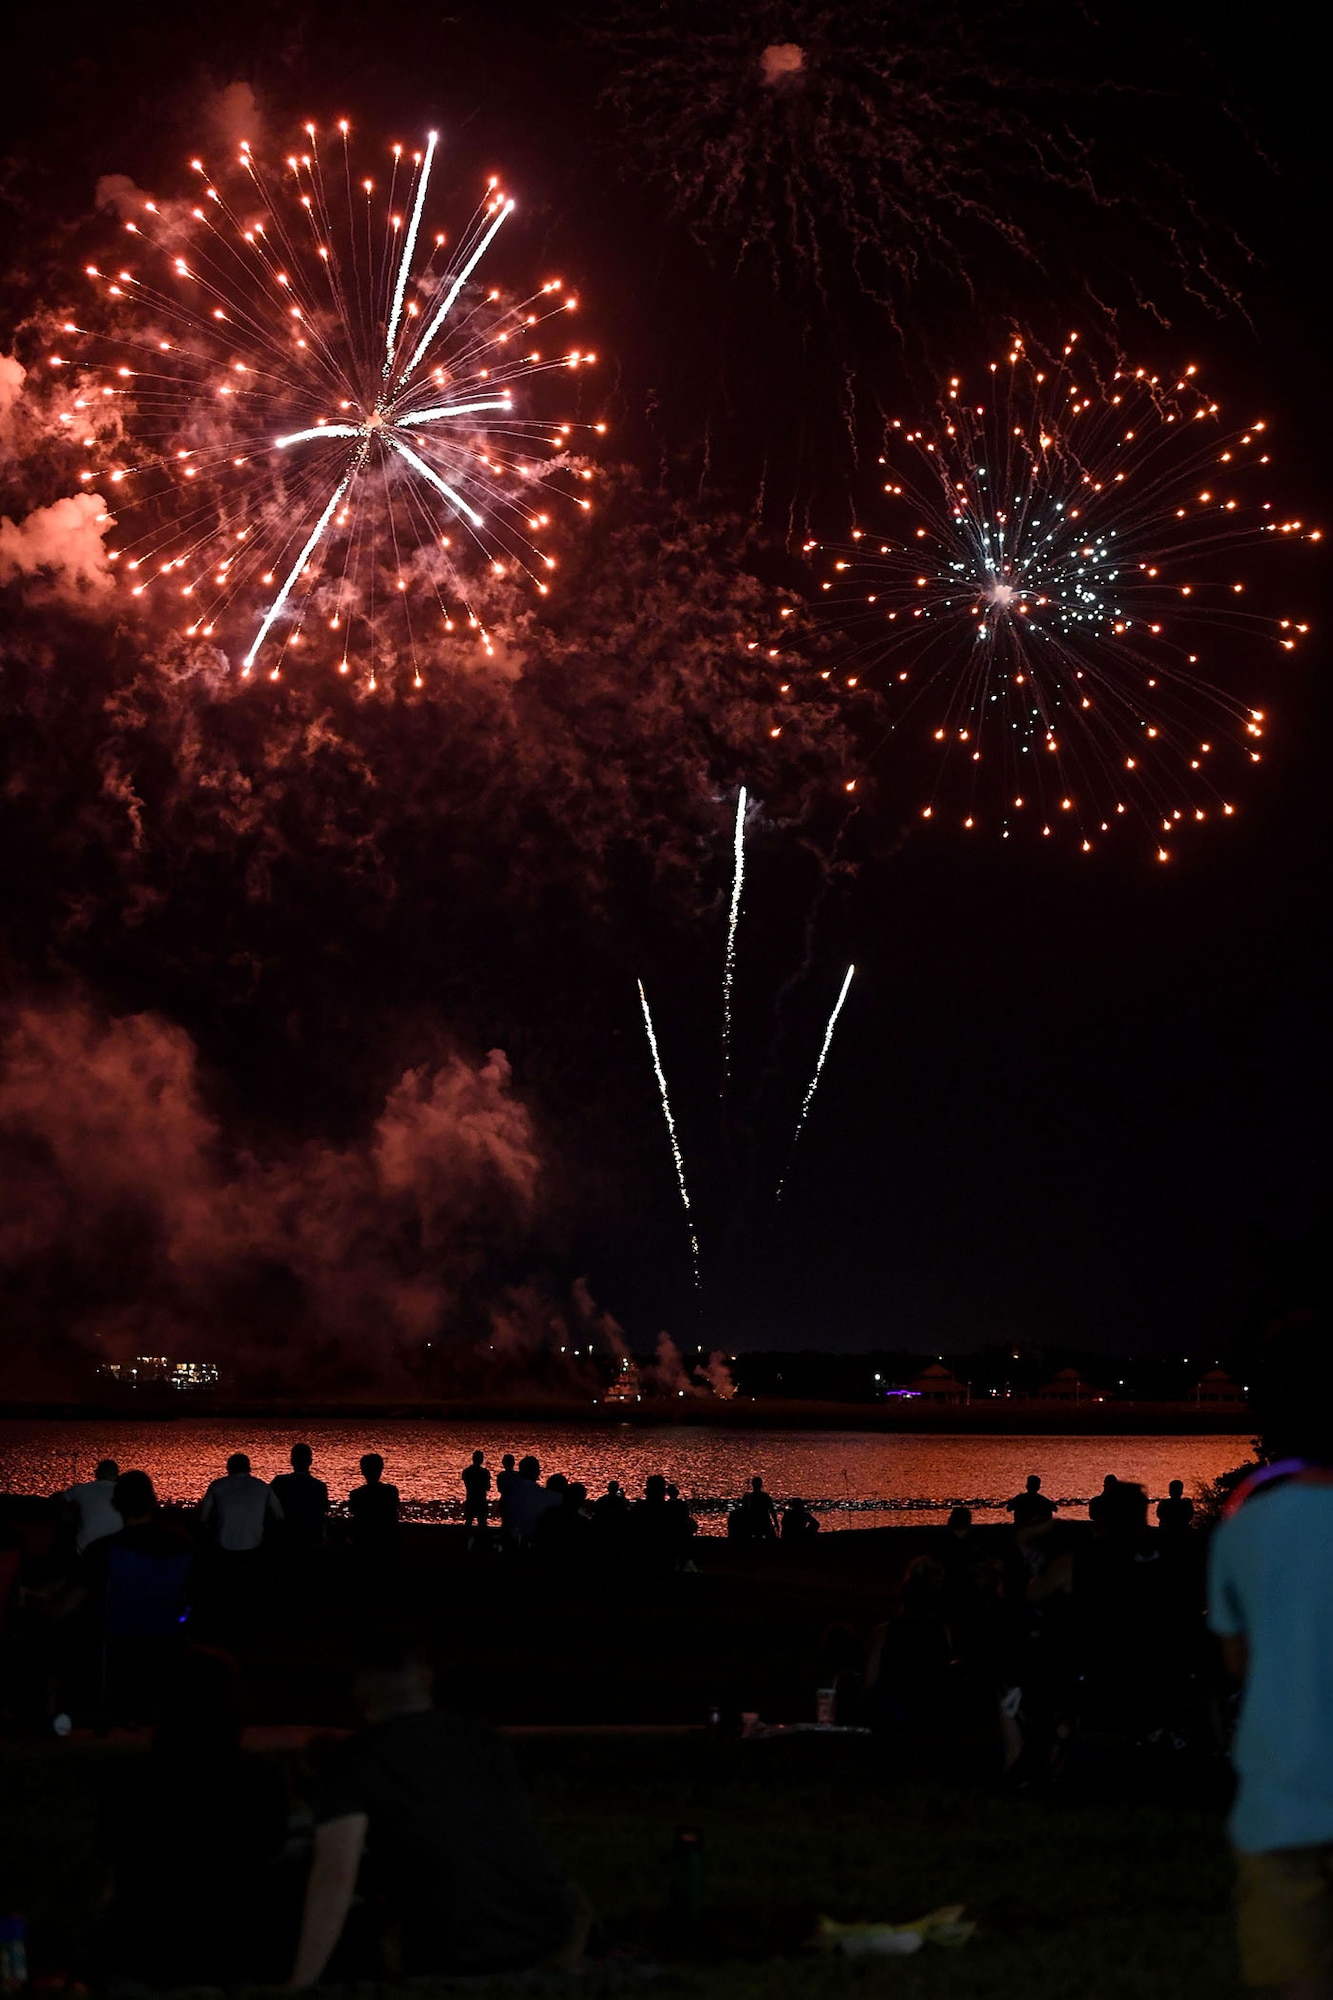 Keesler personnel and families watch a fireworks display during Freedom Fest at the Bay Breeze Event Center on Keesler Air Force Base, Mississippi, June 30, 2022. The event also included a wing eating contest and a frozen mullet toss competition. (U.S. Air Force photo by Kemberly Groue)